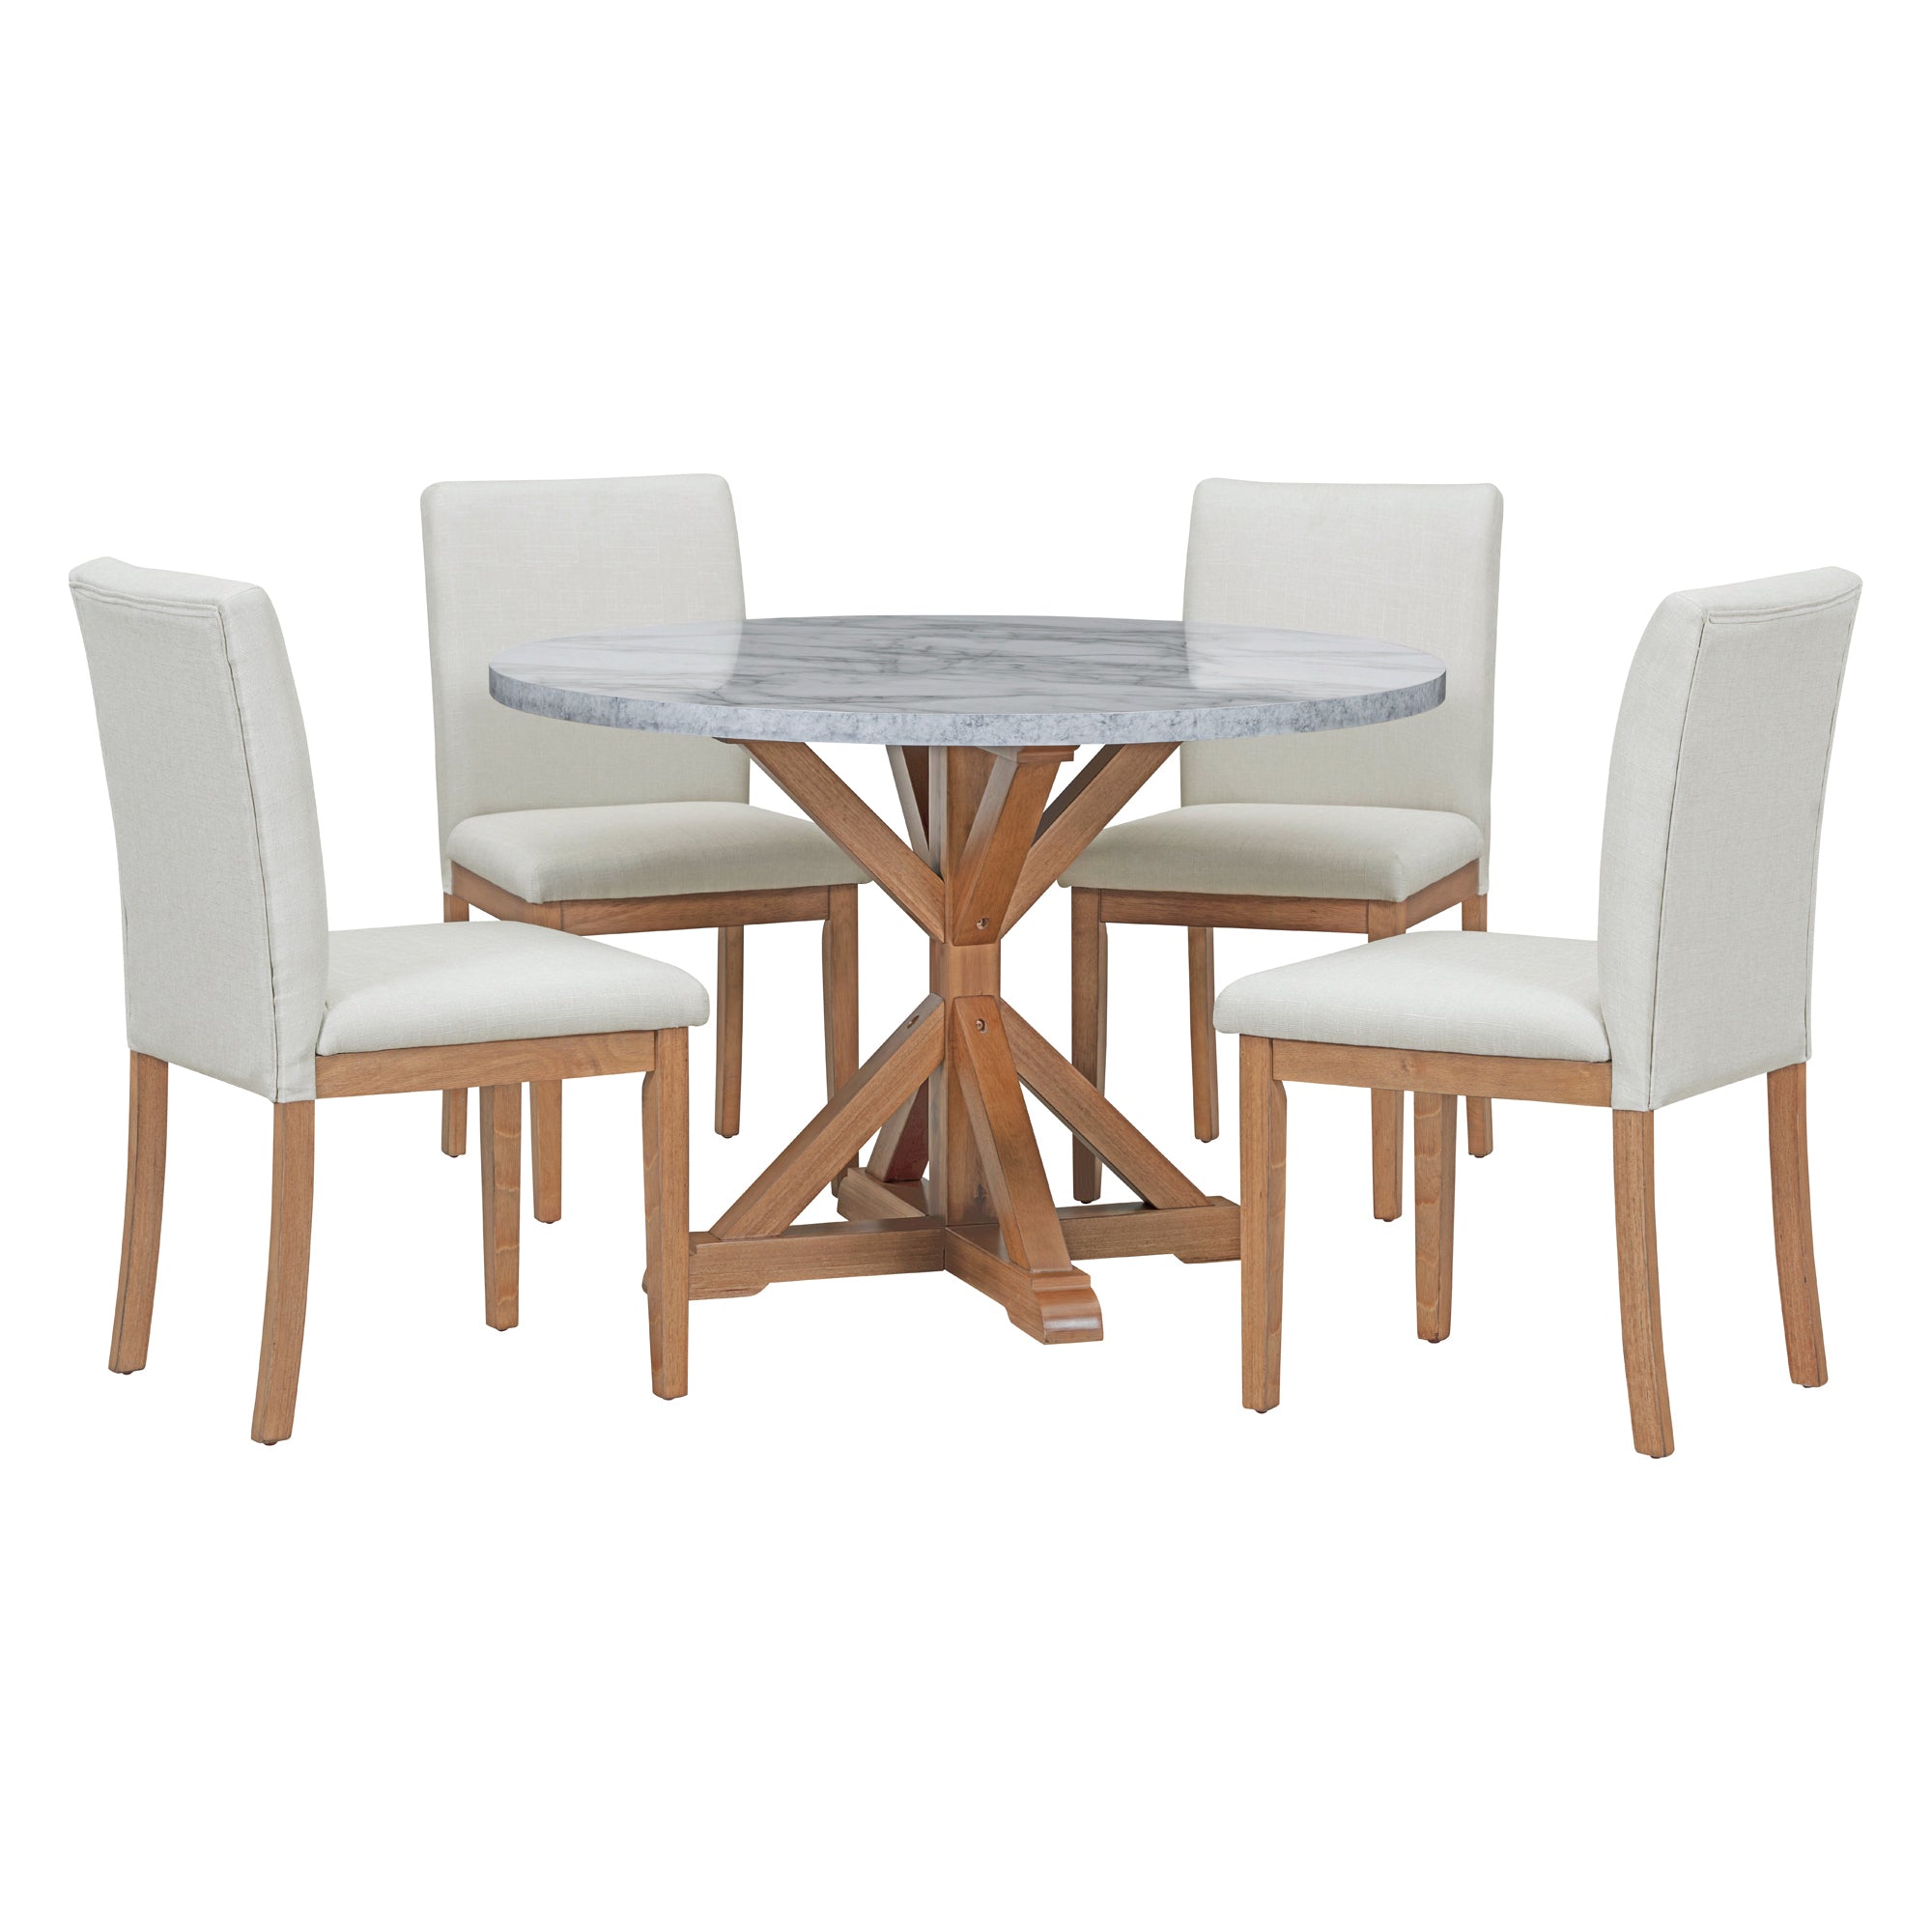 TREXM 5-Piece Farmhouse Style Dining Table Set, Marble Sticker and Cross Bracket Pedestal Dining Table, and 4 Upholstered Chairs (White+Walnut)